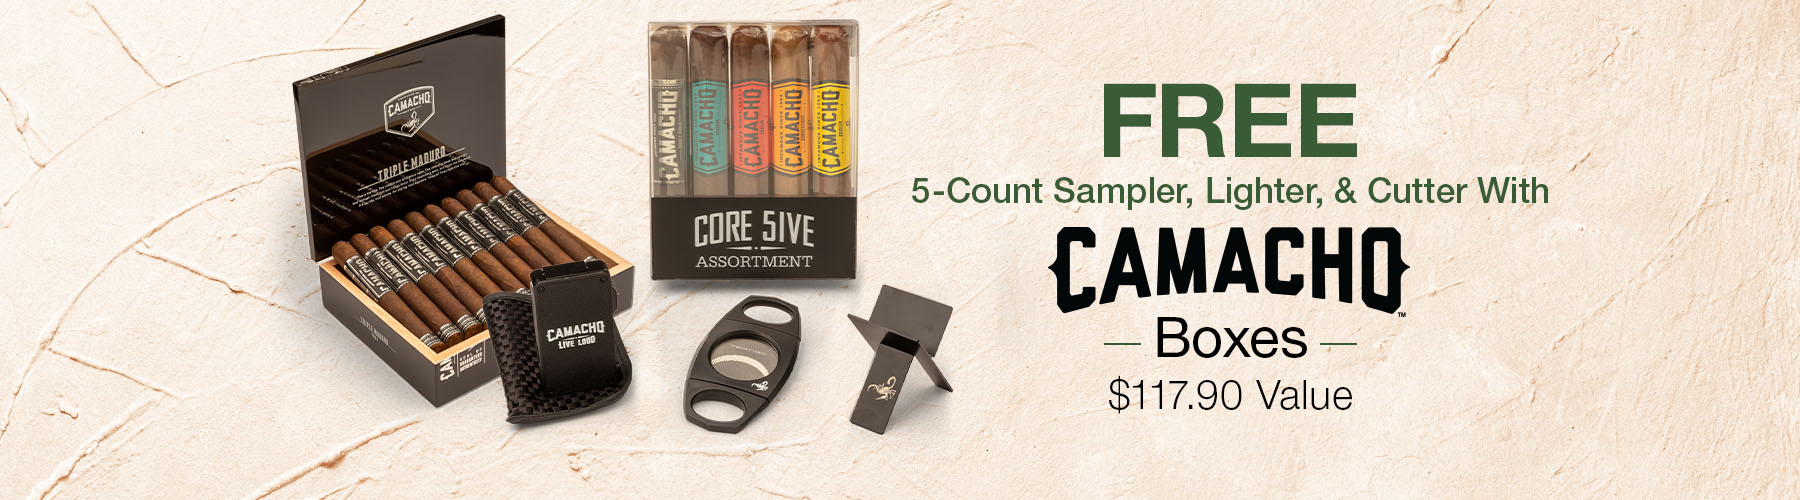 Free 5-Count Sampler, Lighter, & Cutter with Camacho boxes! $117.90 value